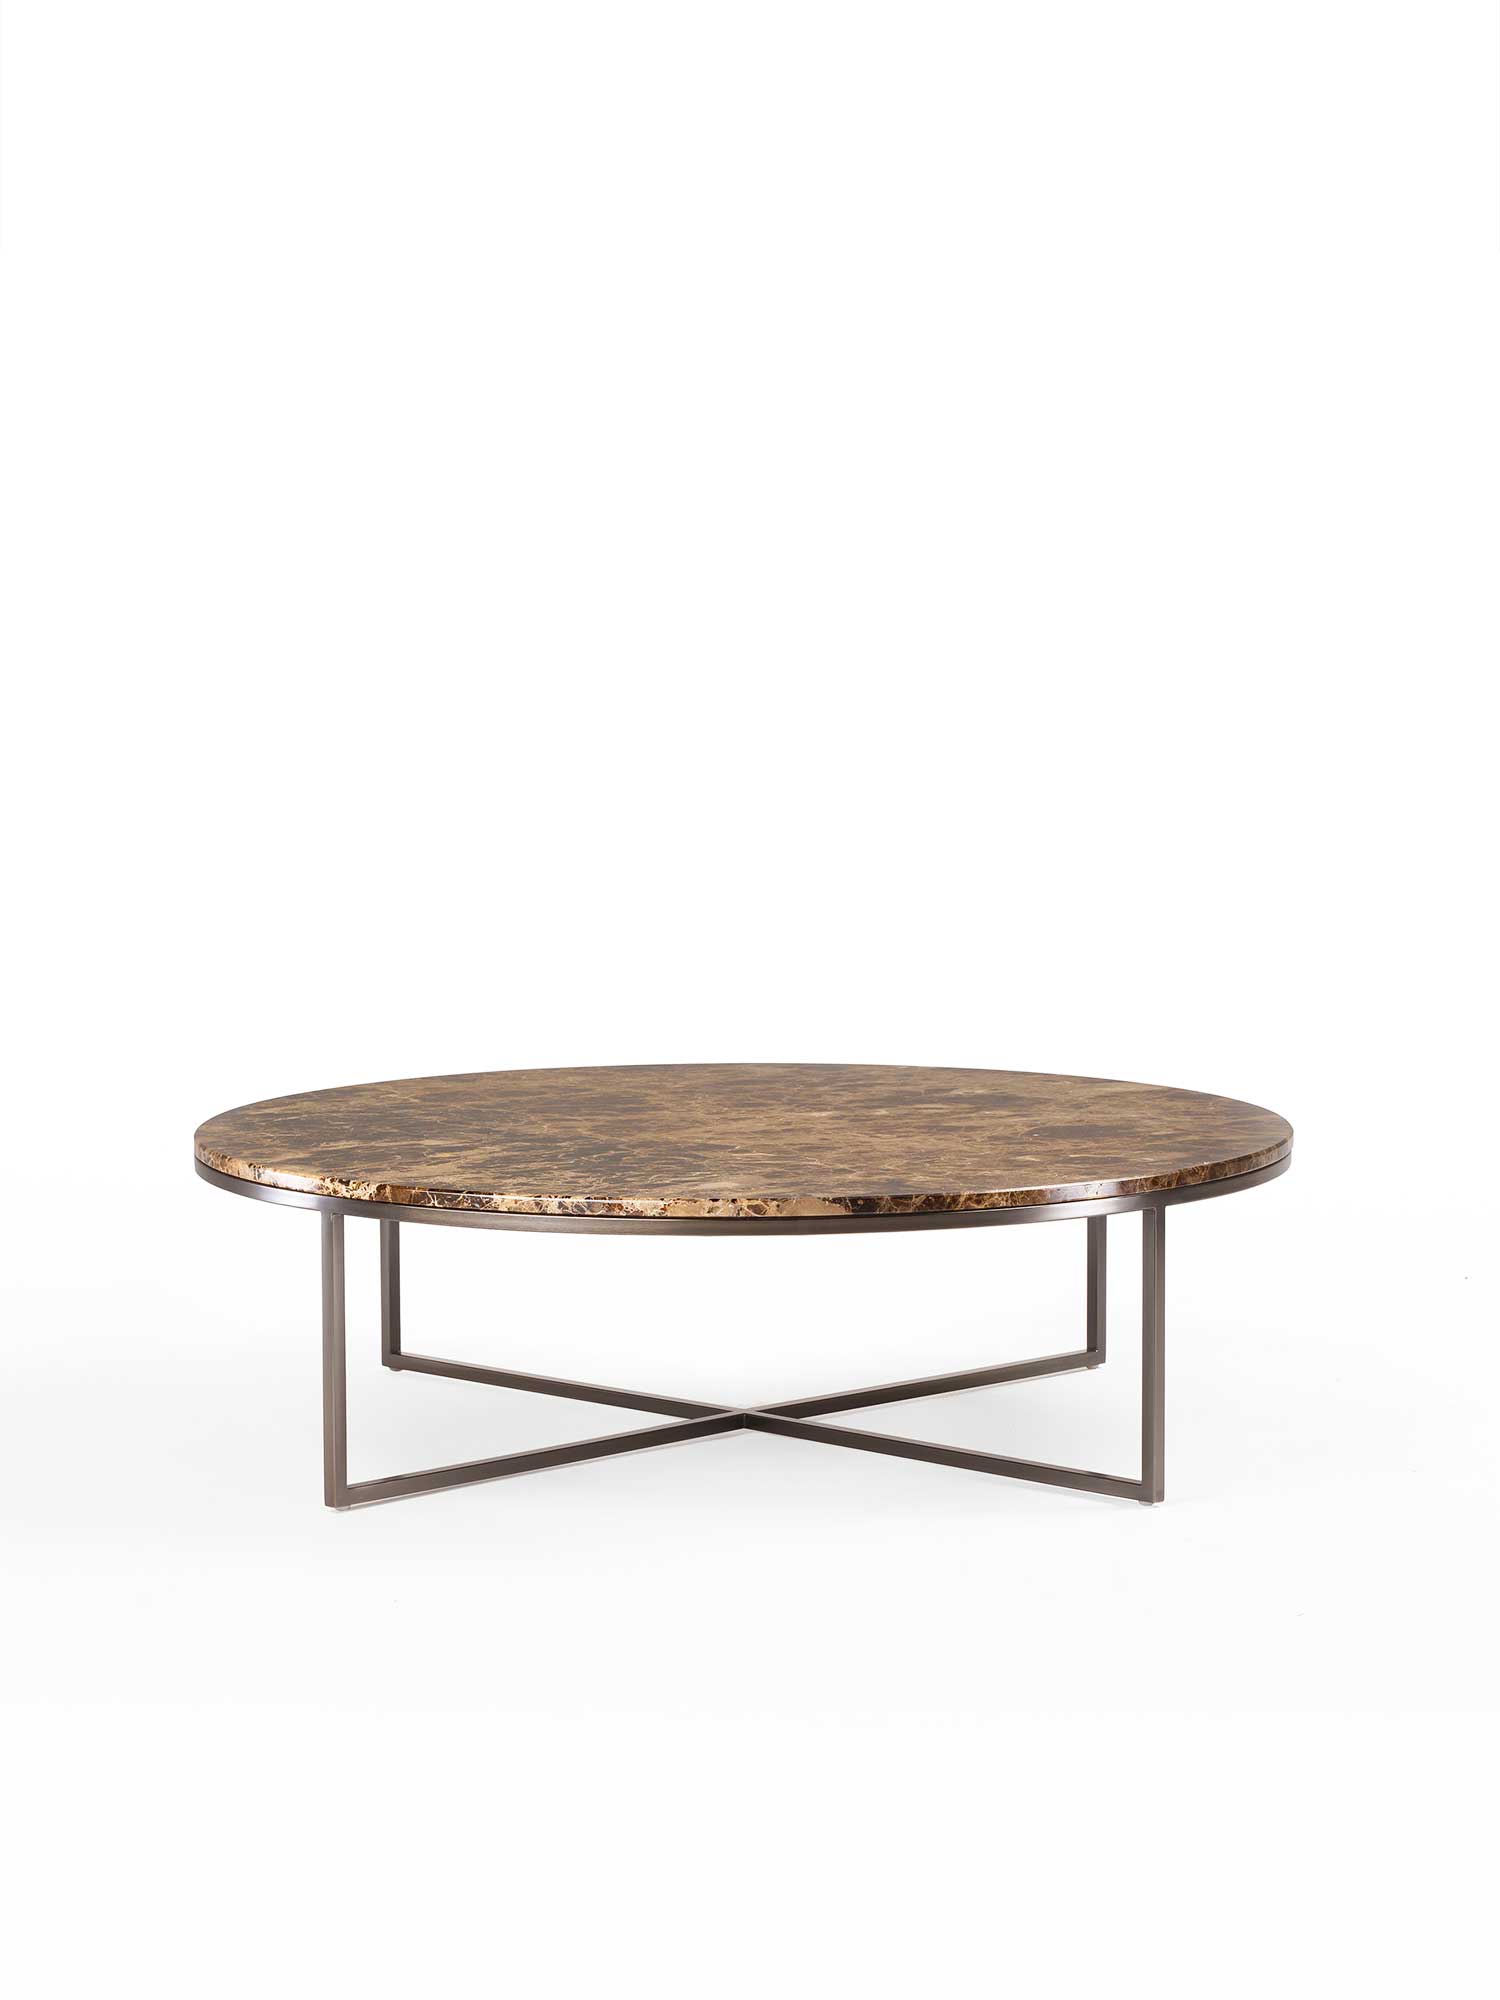 Img001 Frame Coffee Table D100x28h OPM14 OPP3